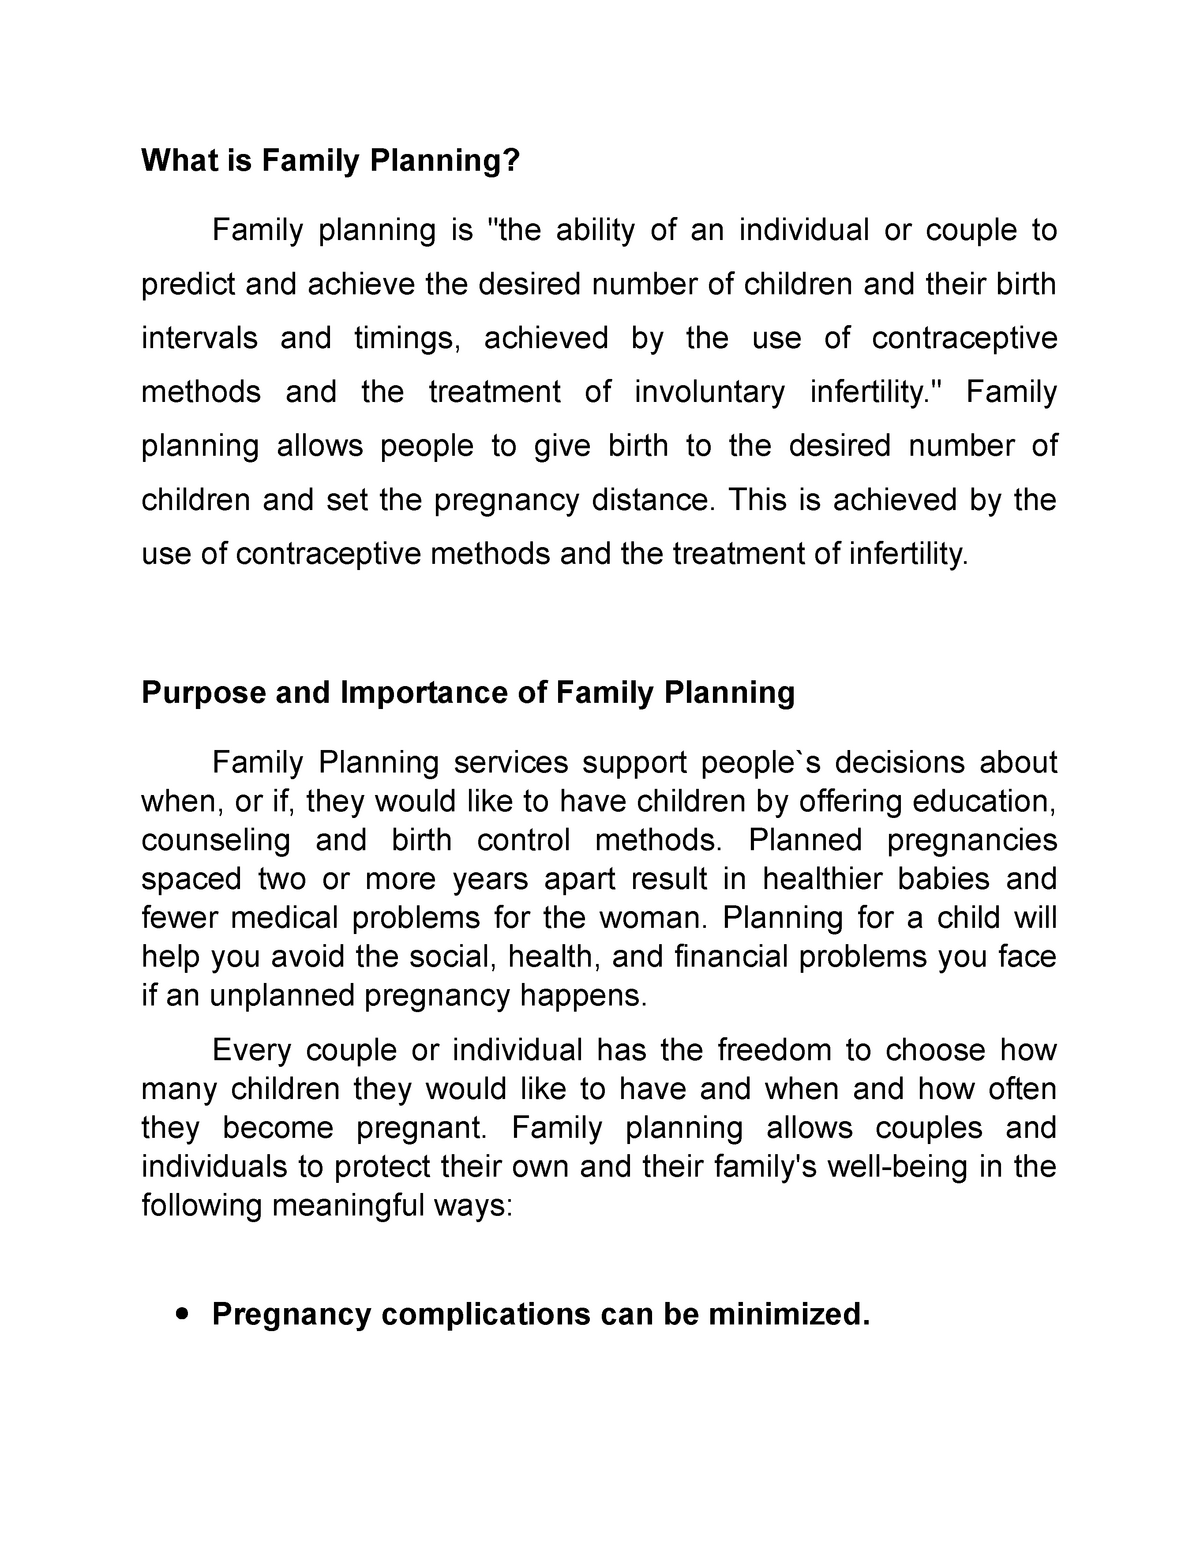 is-family-planning-dangerous-benefits-possible-side-effects-mechanism-of-action-youtube